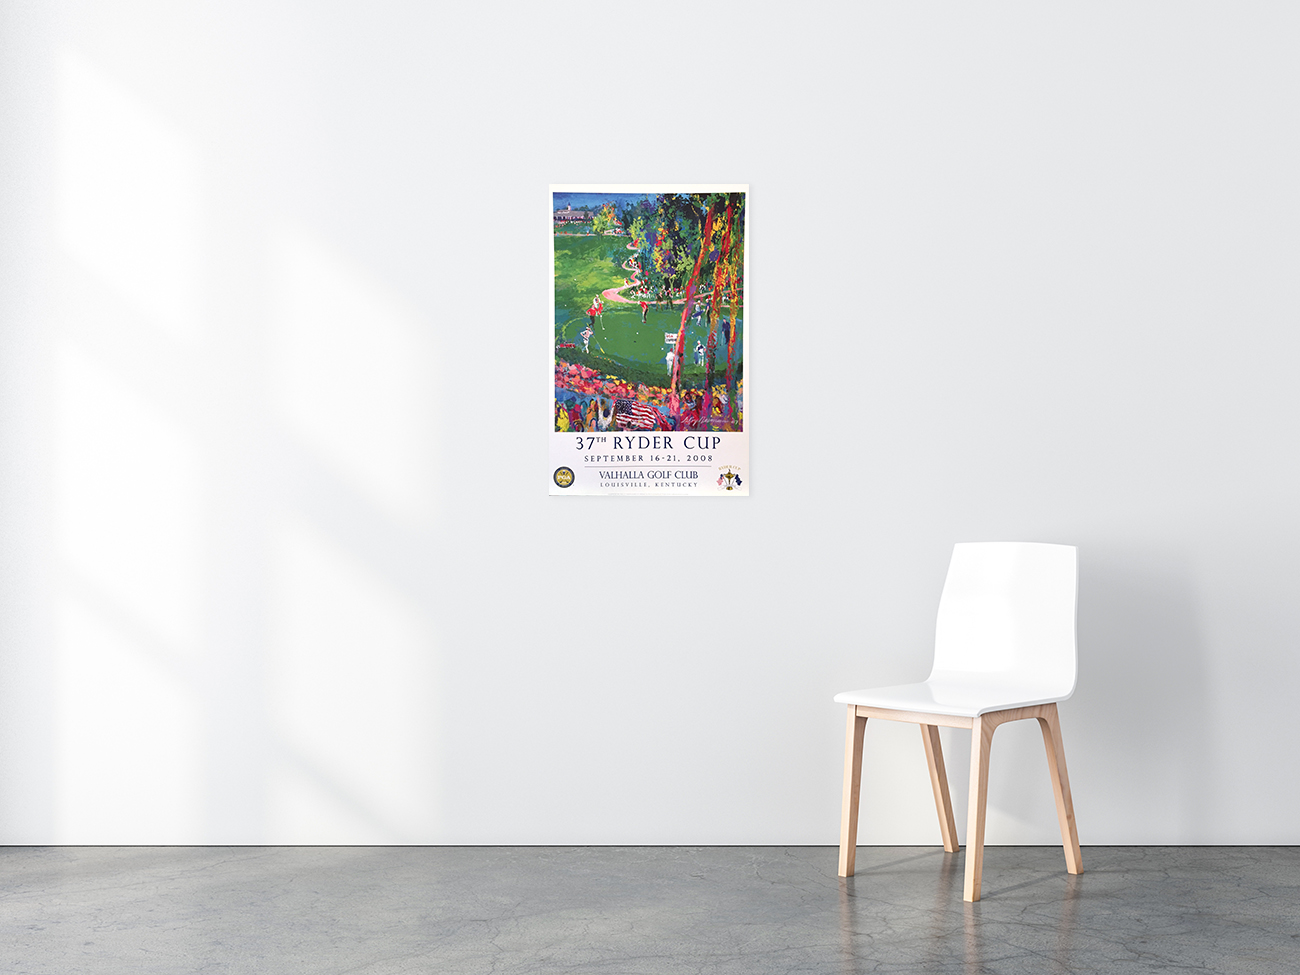 37th Ryder Cup poster in situ